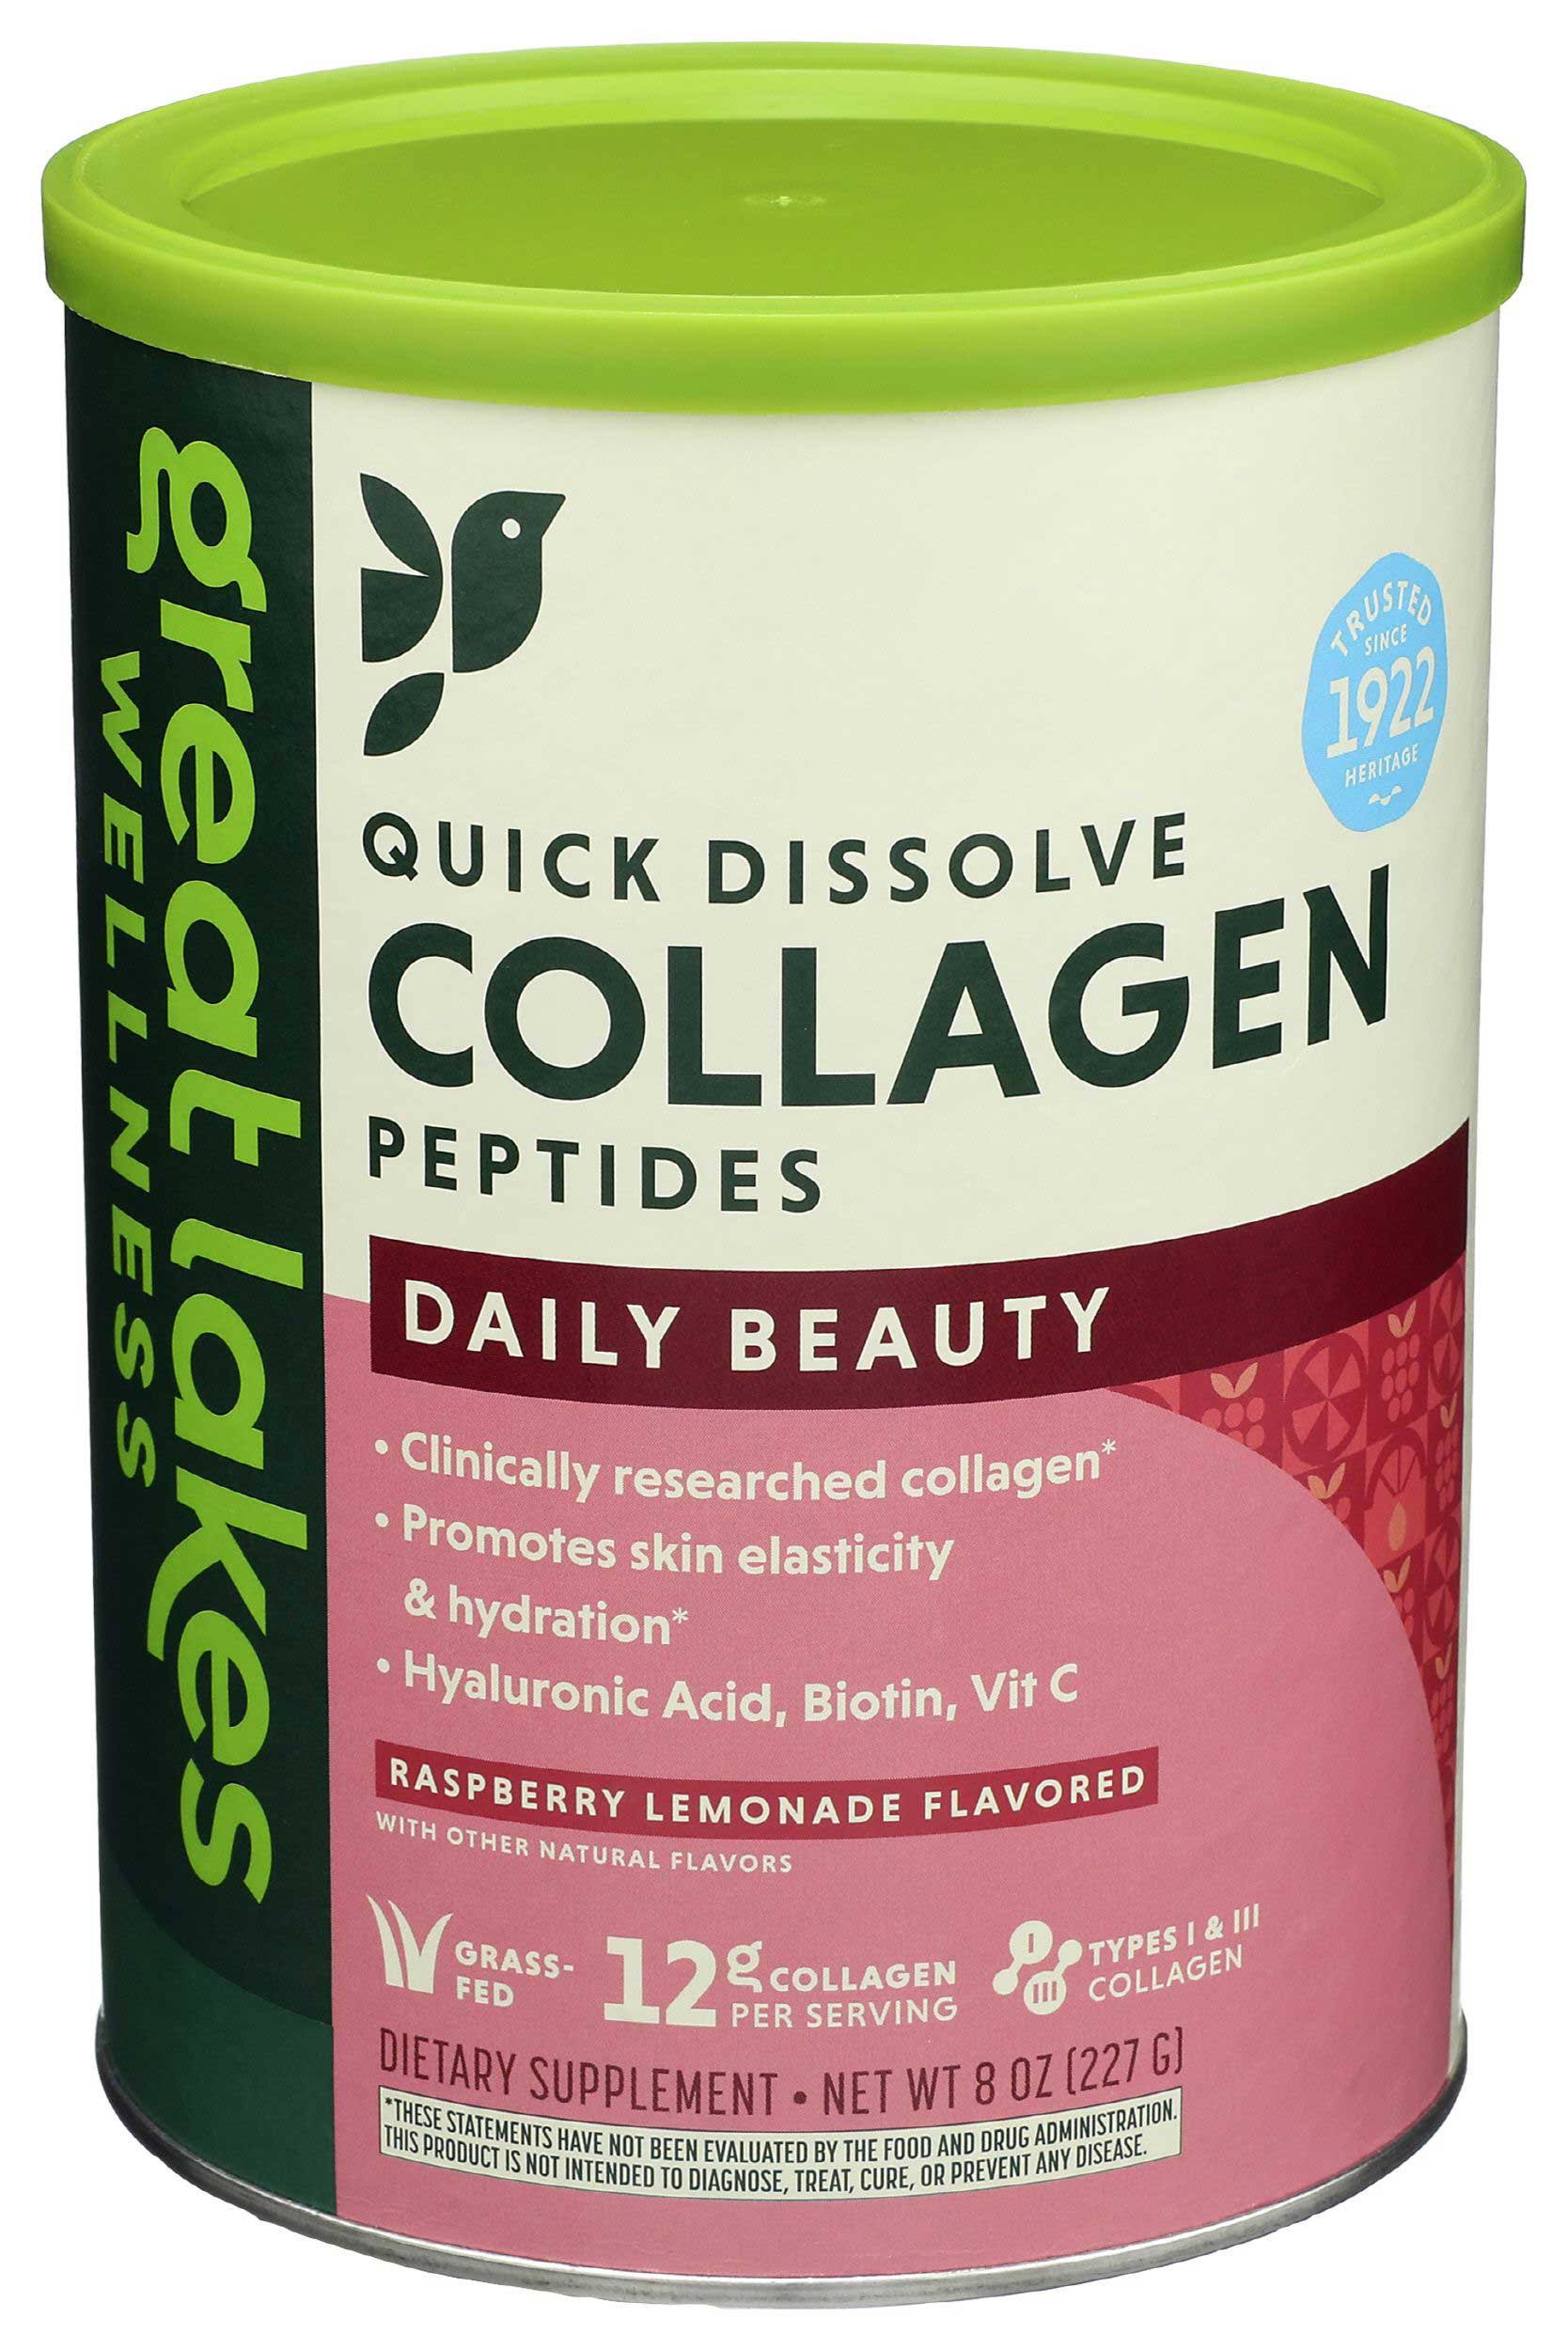 Great Lakes Wellness - Collagen Peptides Daily Beauty, Raspberry